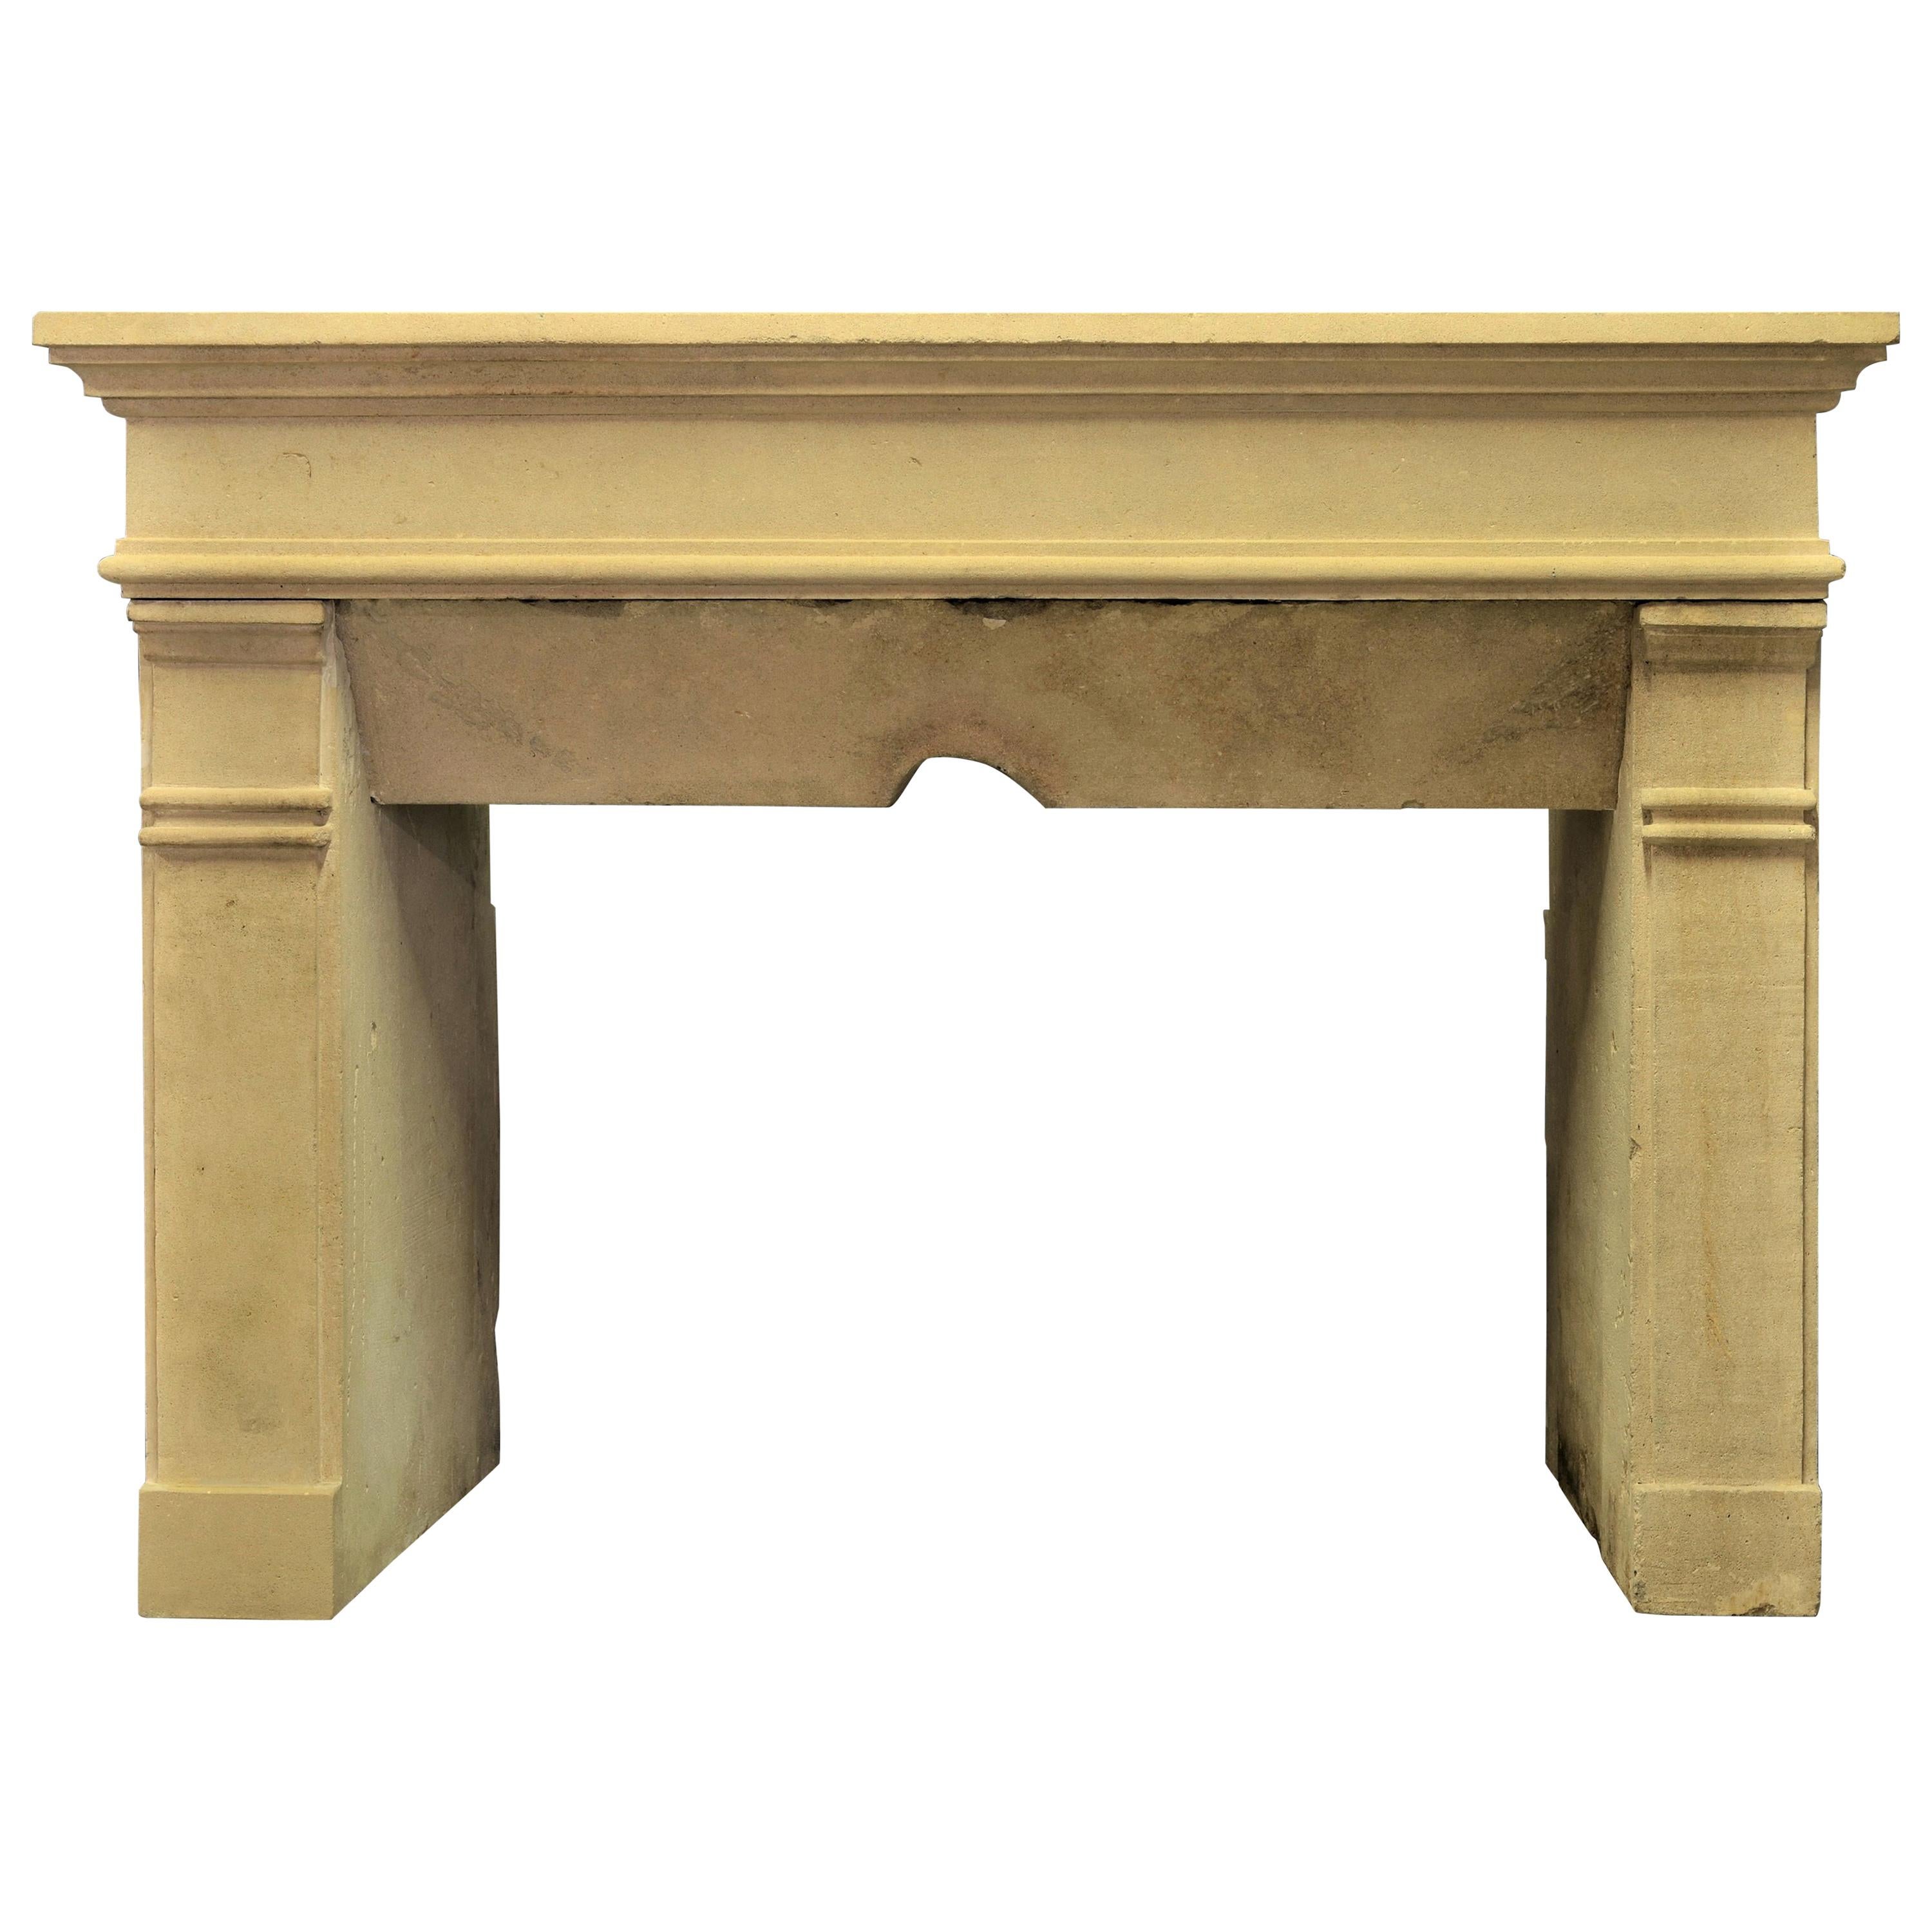 Antique Fireplace Mantel from France